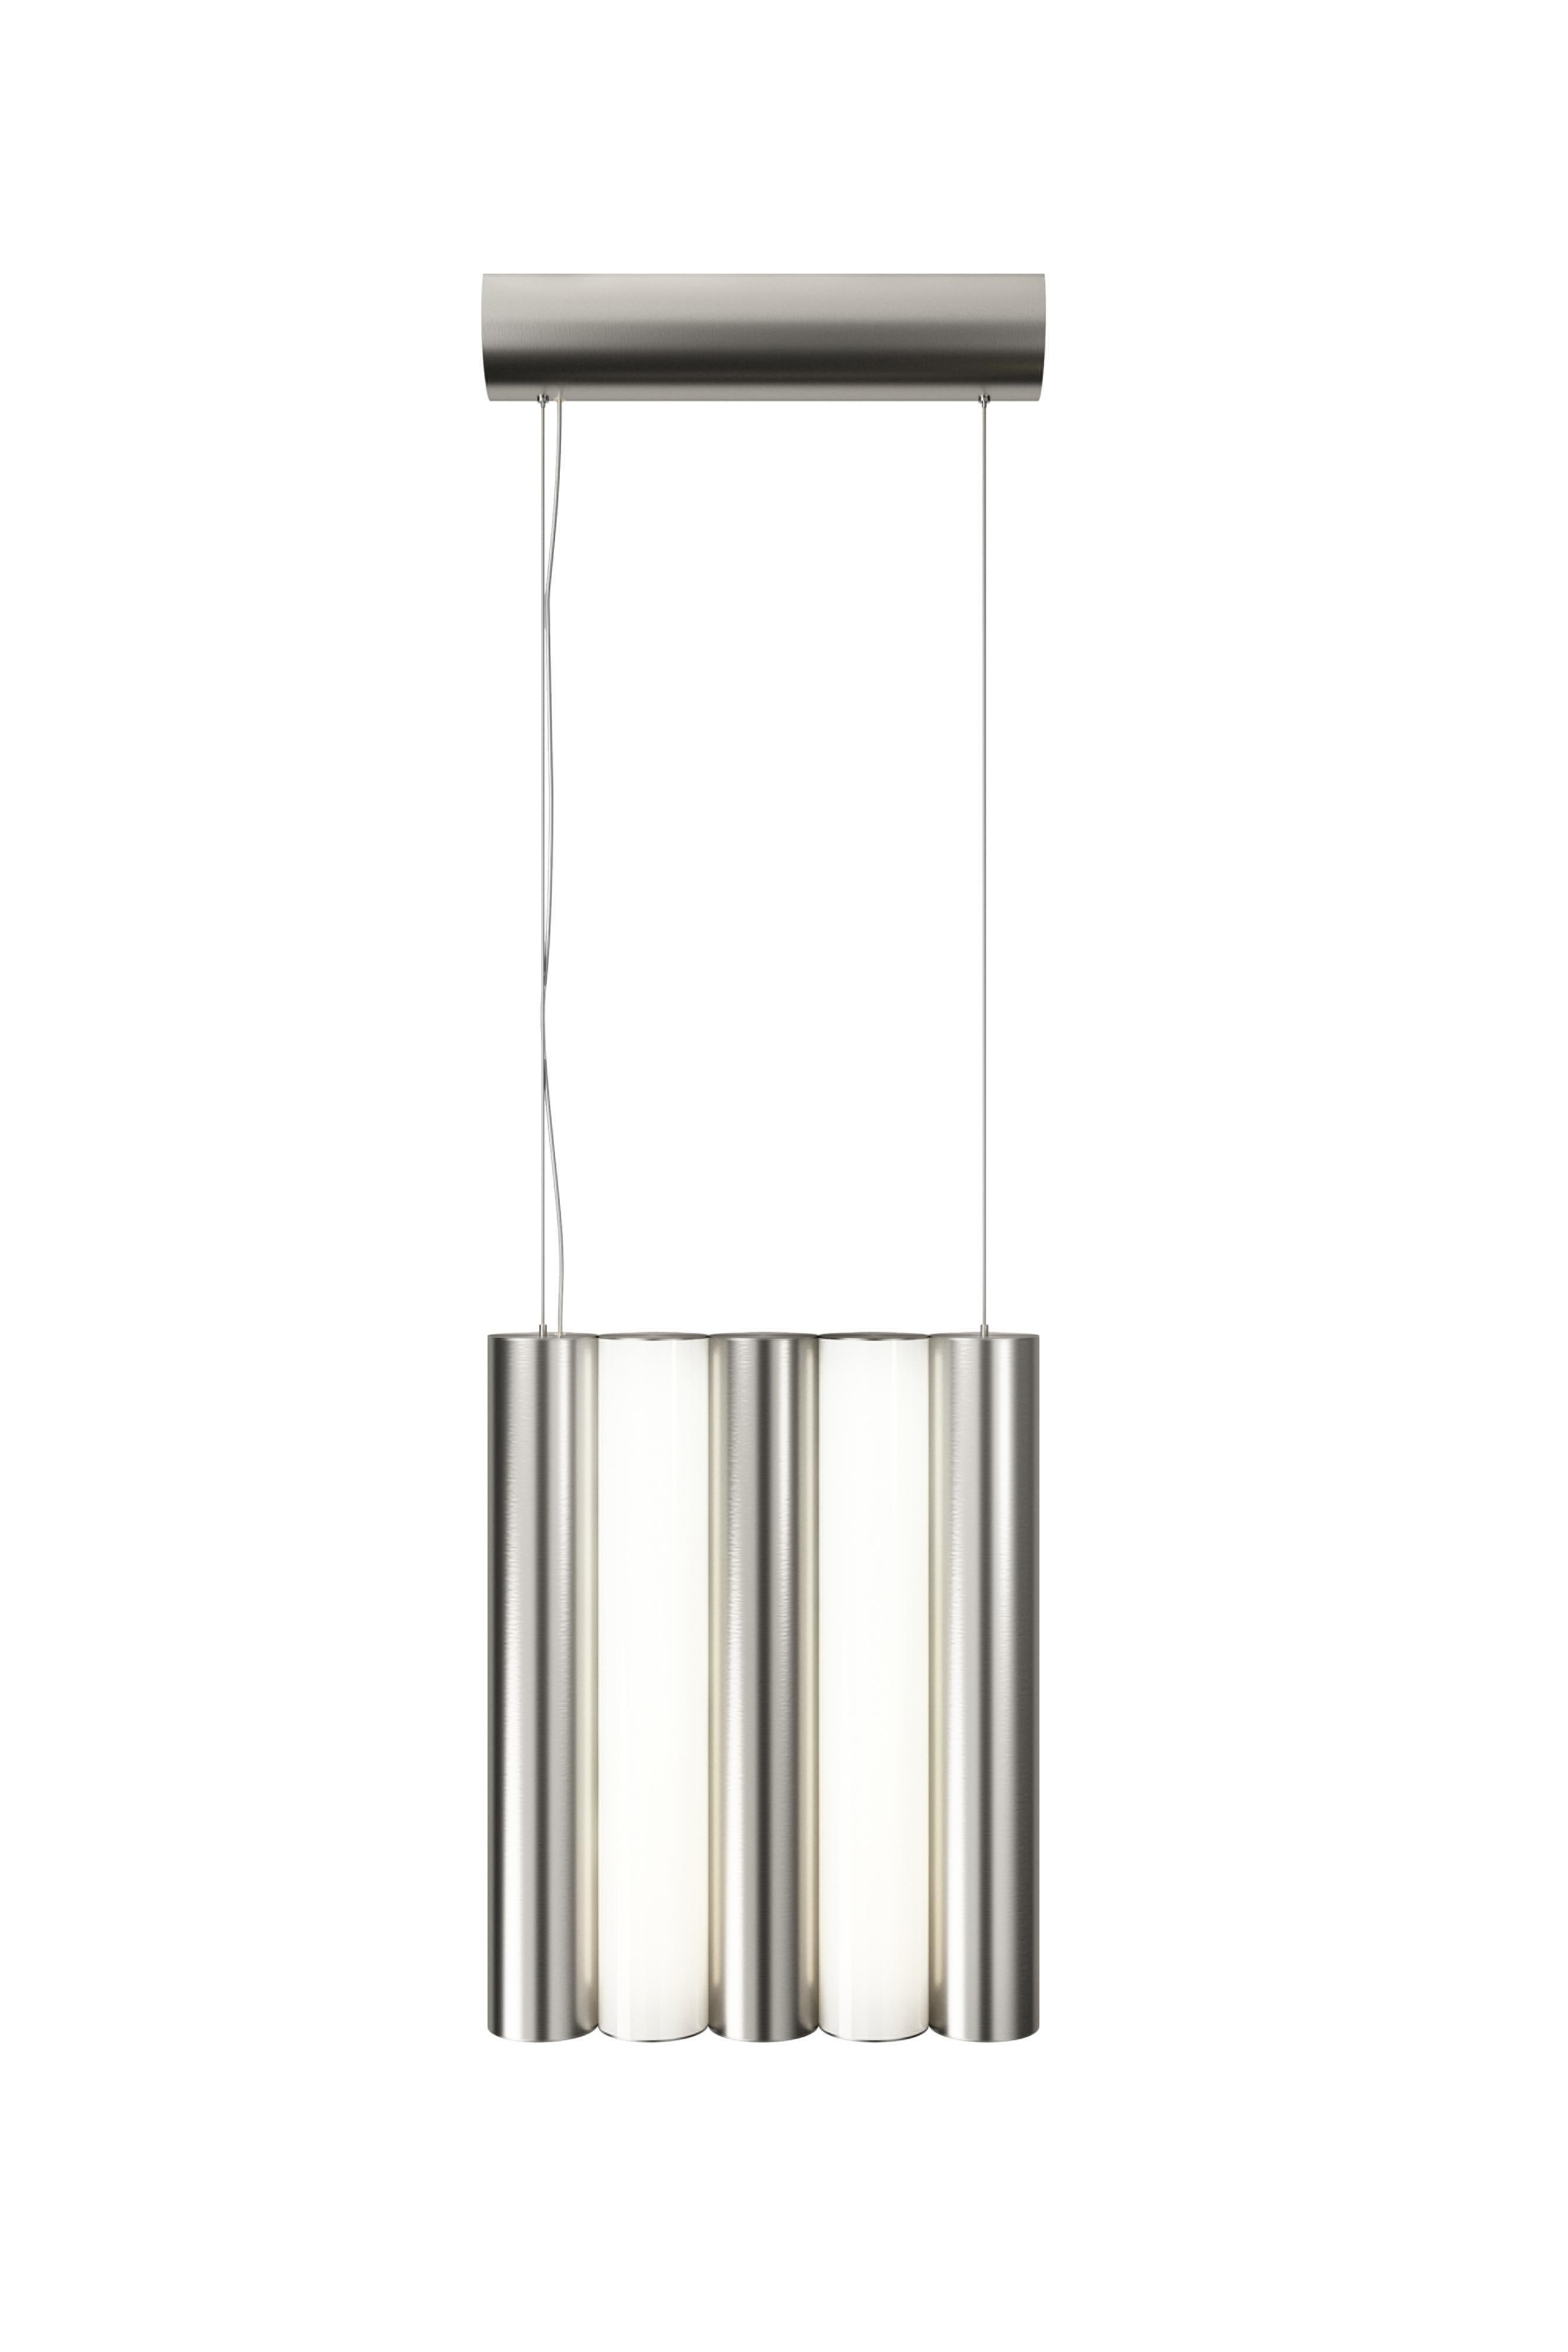 Gamma L5 Nickel pendant by Sylvain Willenz
Dimensions: D25 x W5 X H42.3 cm
Materials: Solid brass, White Polycarbonate diffuser. Metal cable and transparent electric cable.
Others finishes and dimensions are available.

All our lamps can be